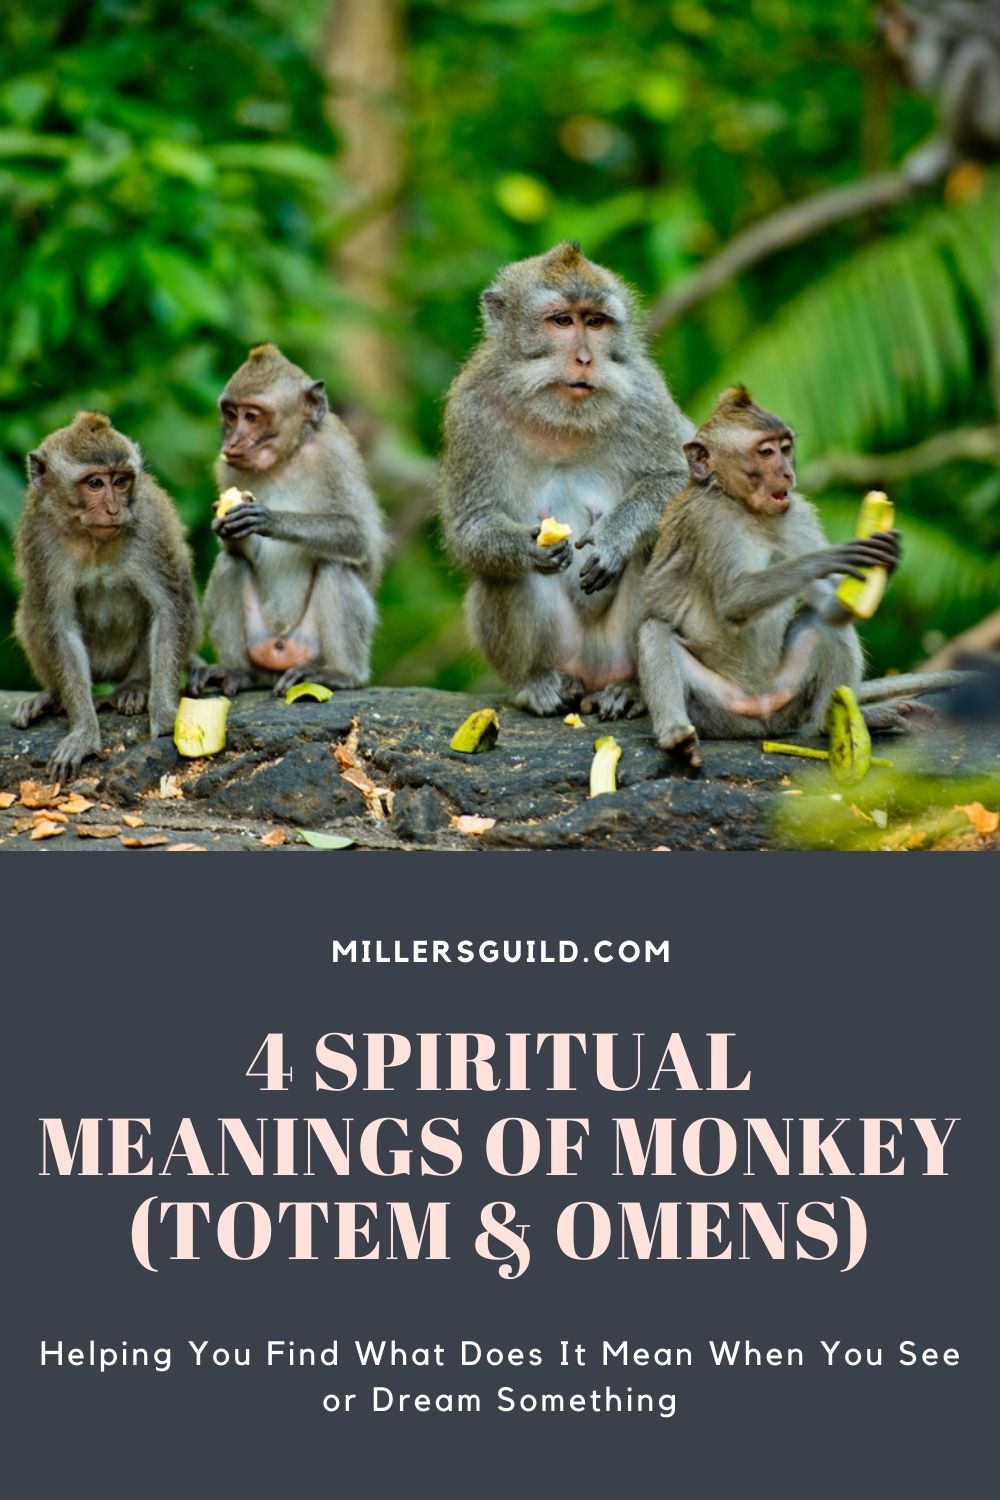 4 Spiritual Meanings of Monkey (Totem & Omens) 2